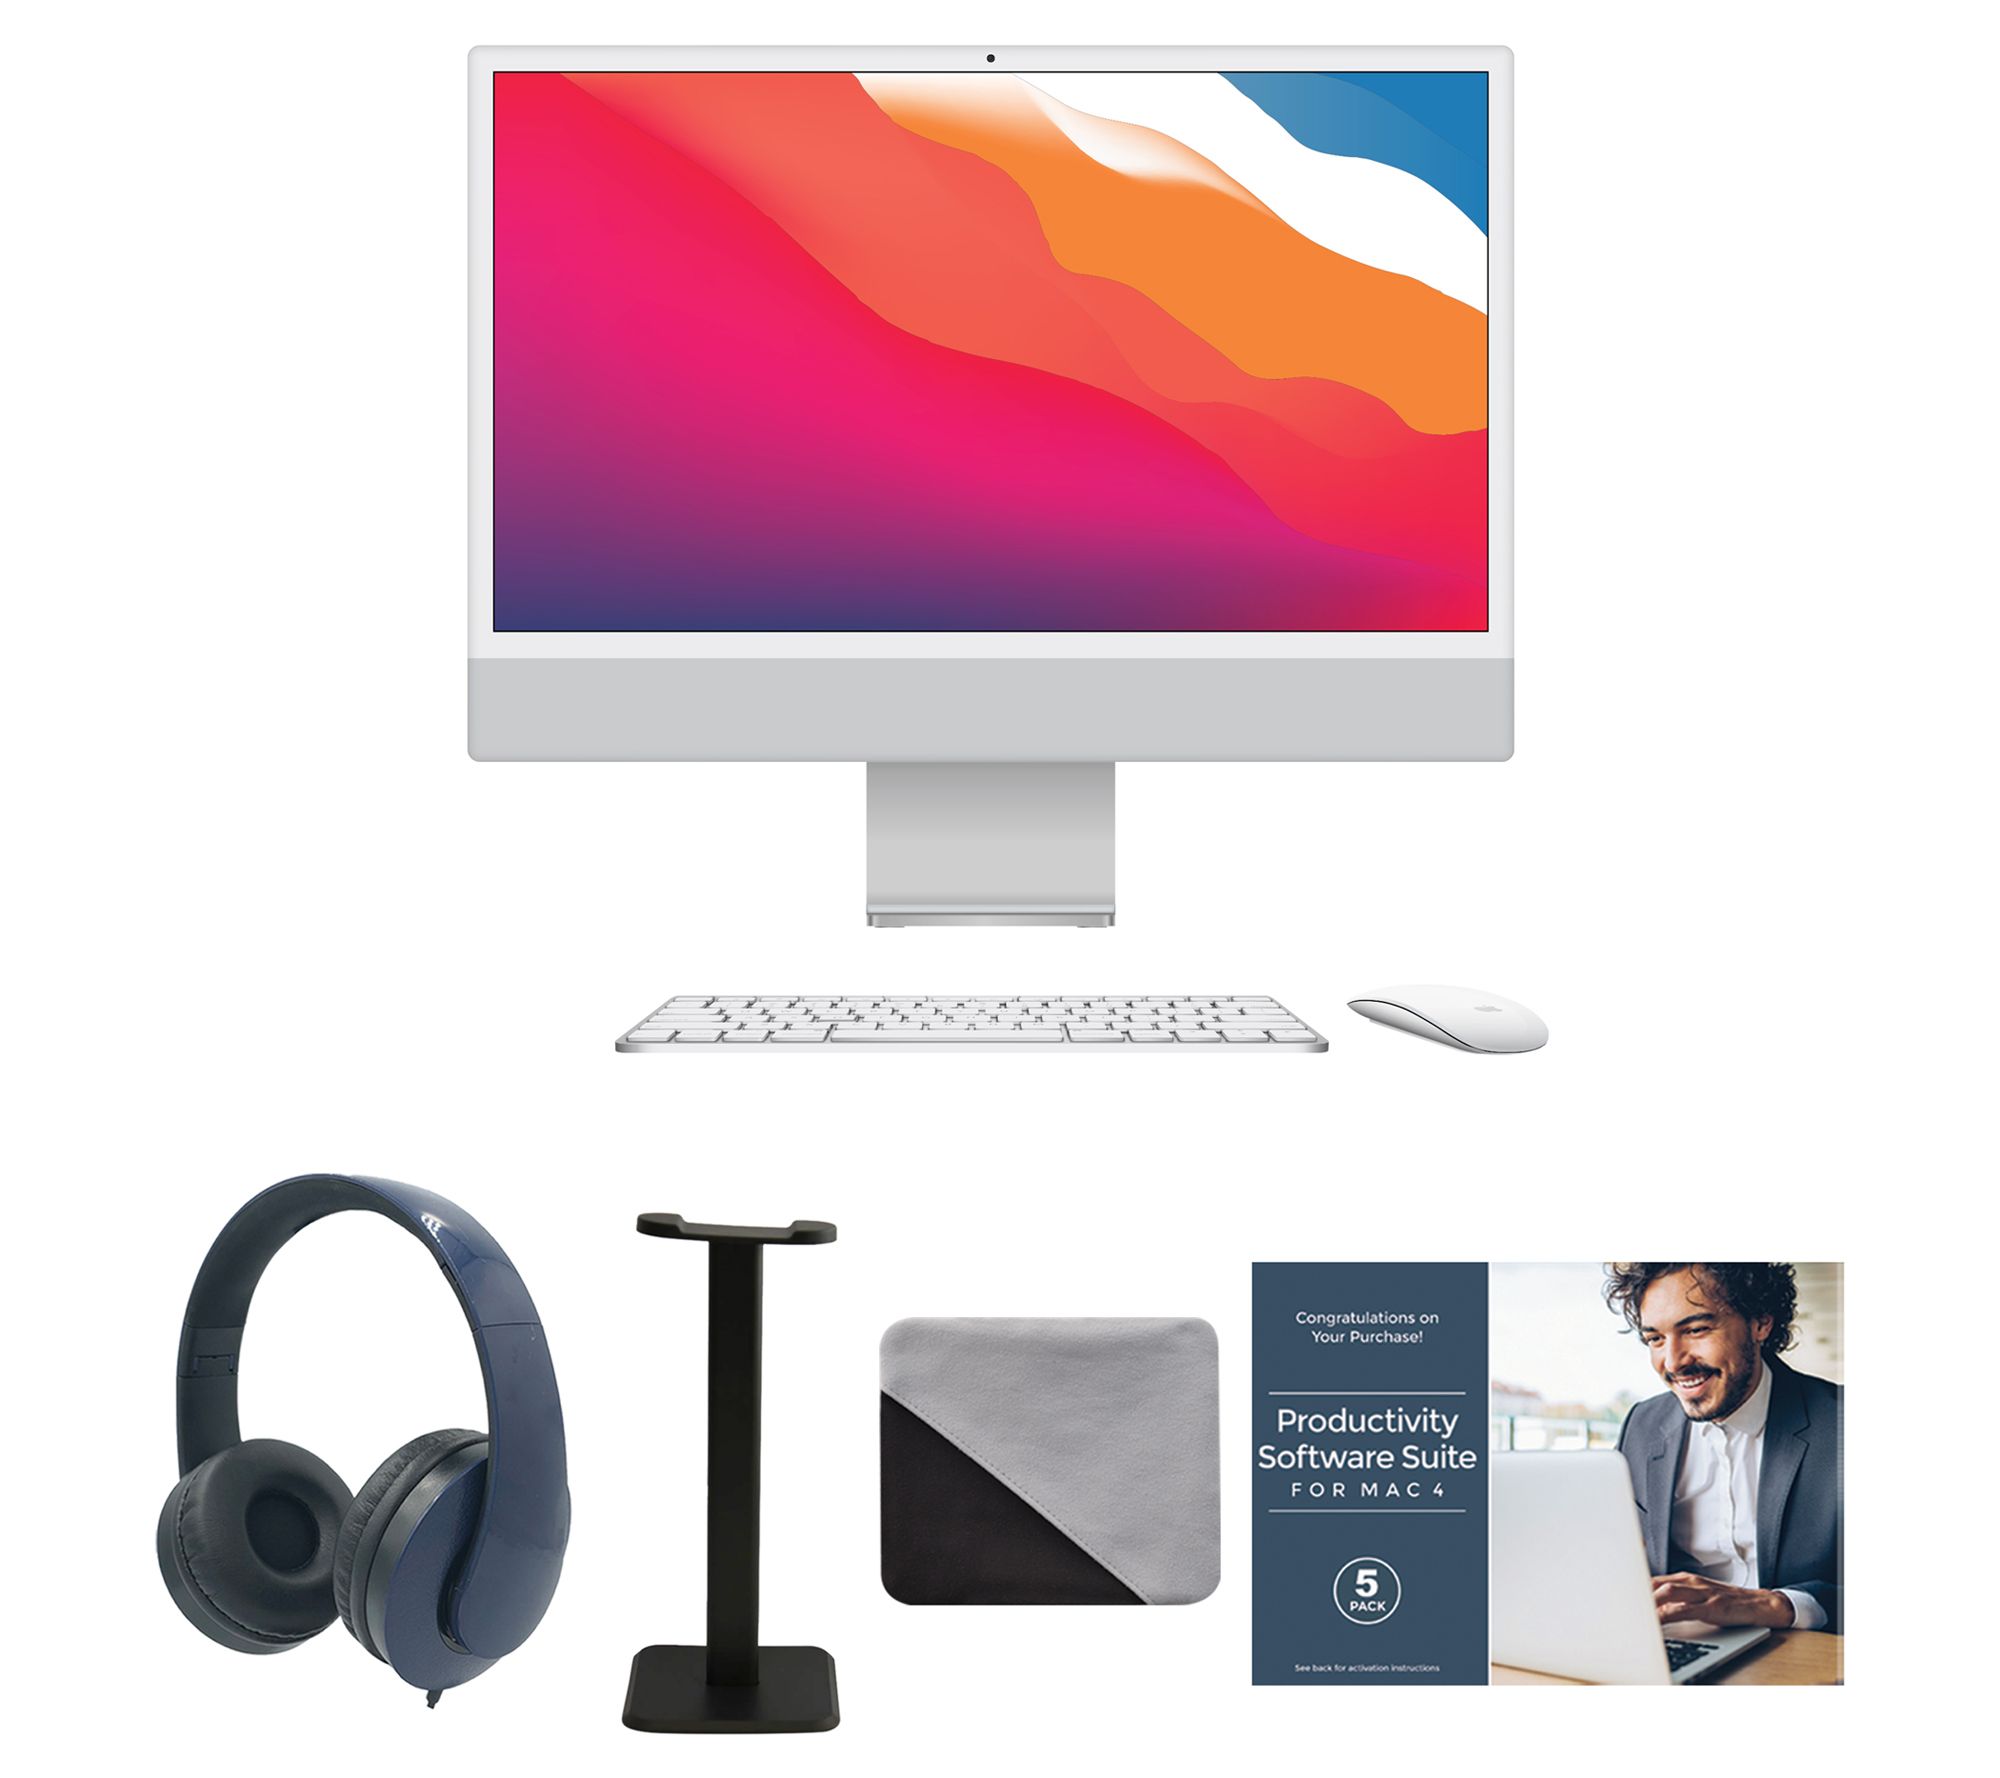 Apple 24-inch iMac (M1 Chip) Computer Review - Consumer Reports